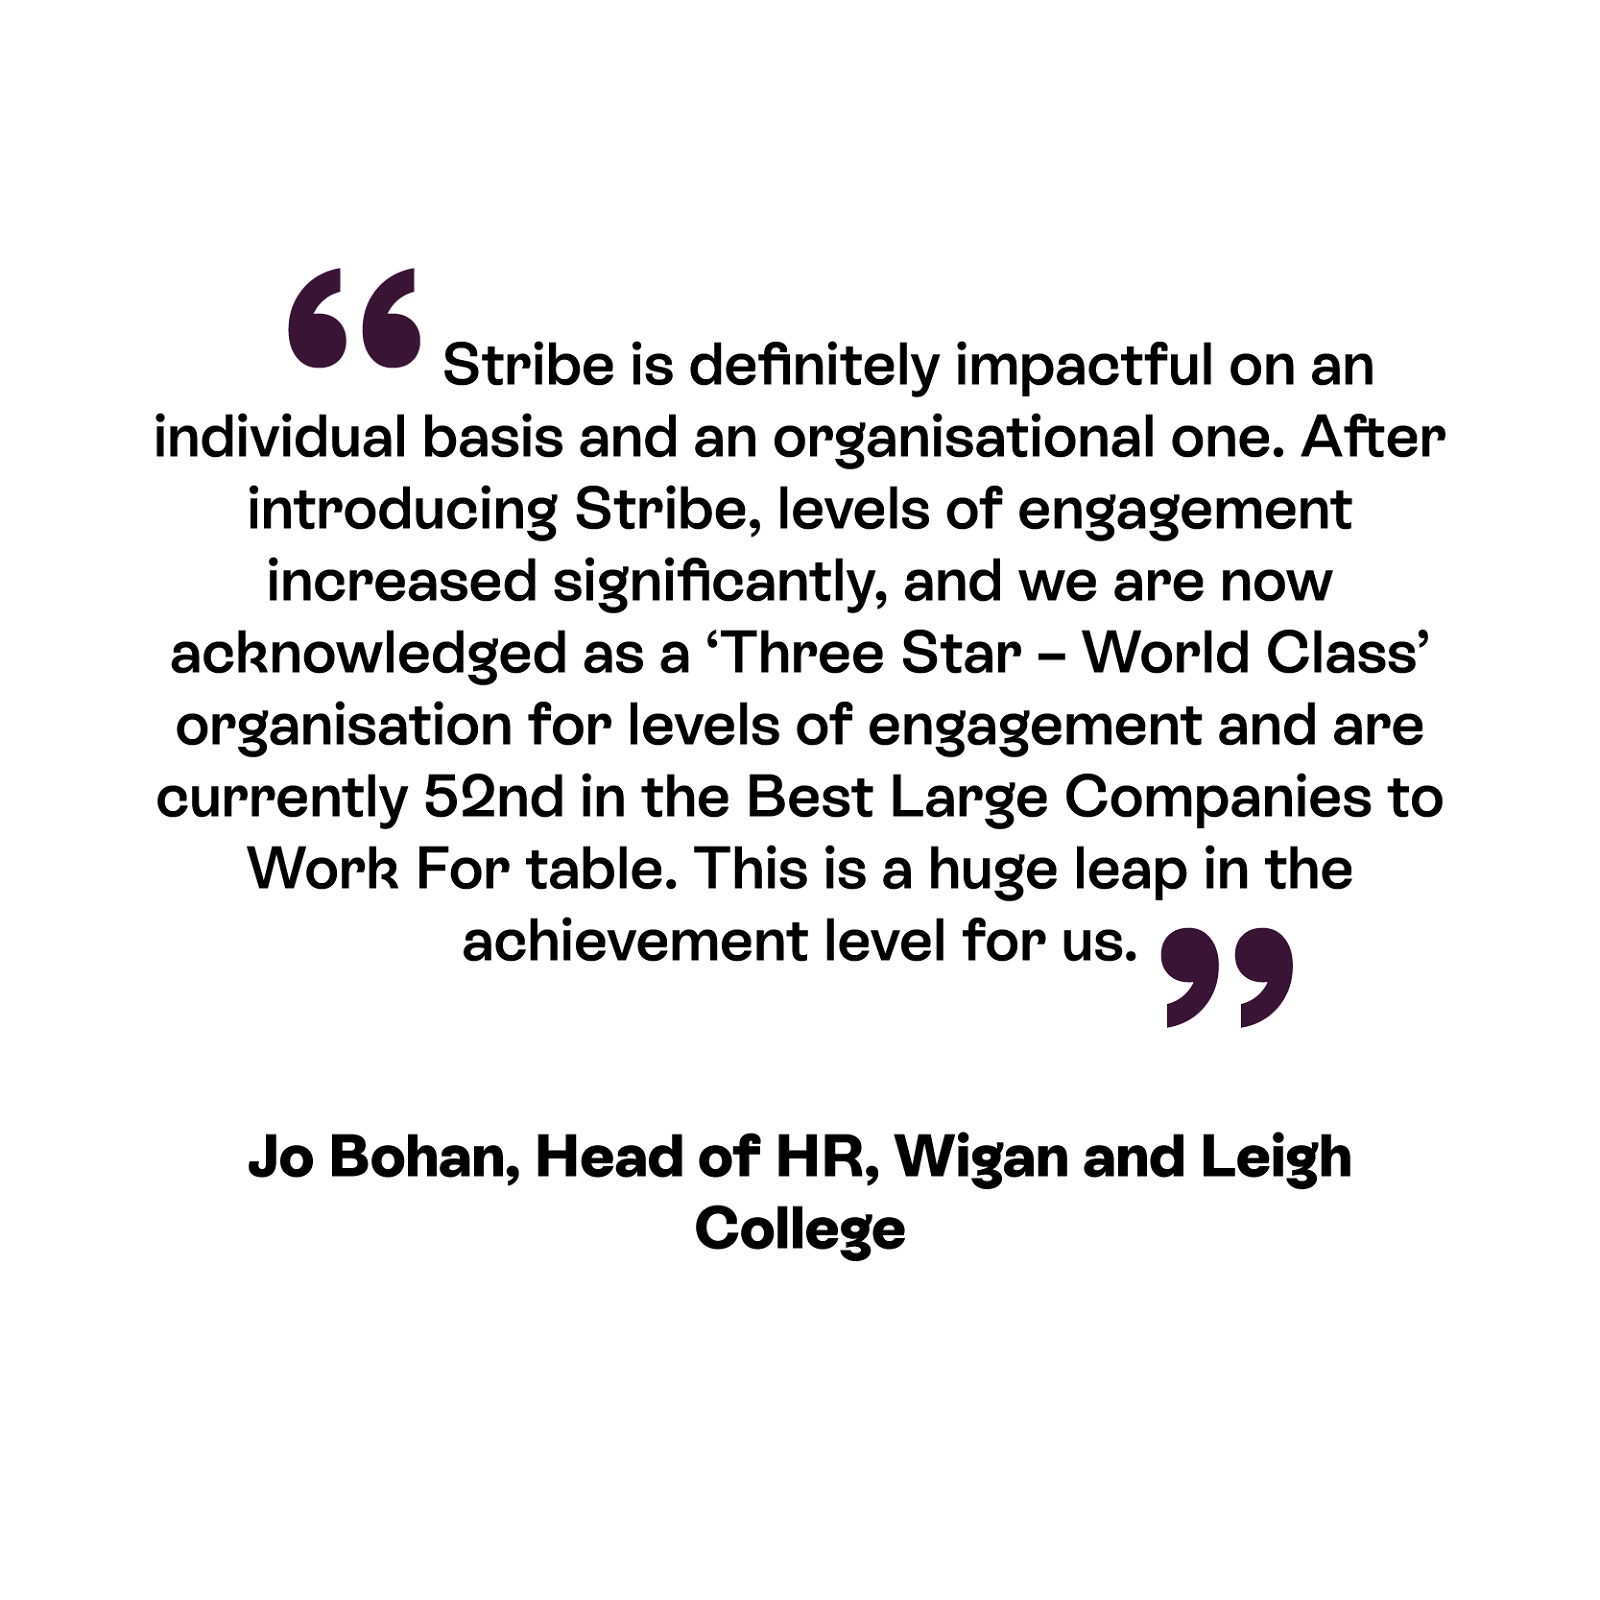 A positive testimonial for Stribe from a manager at Wigan and Leigh College.